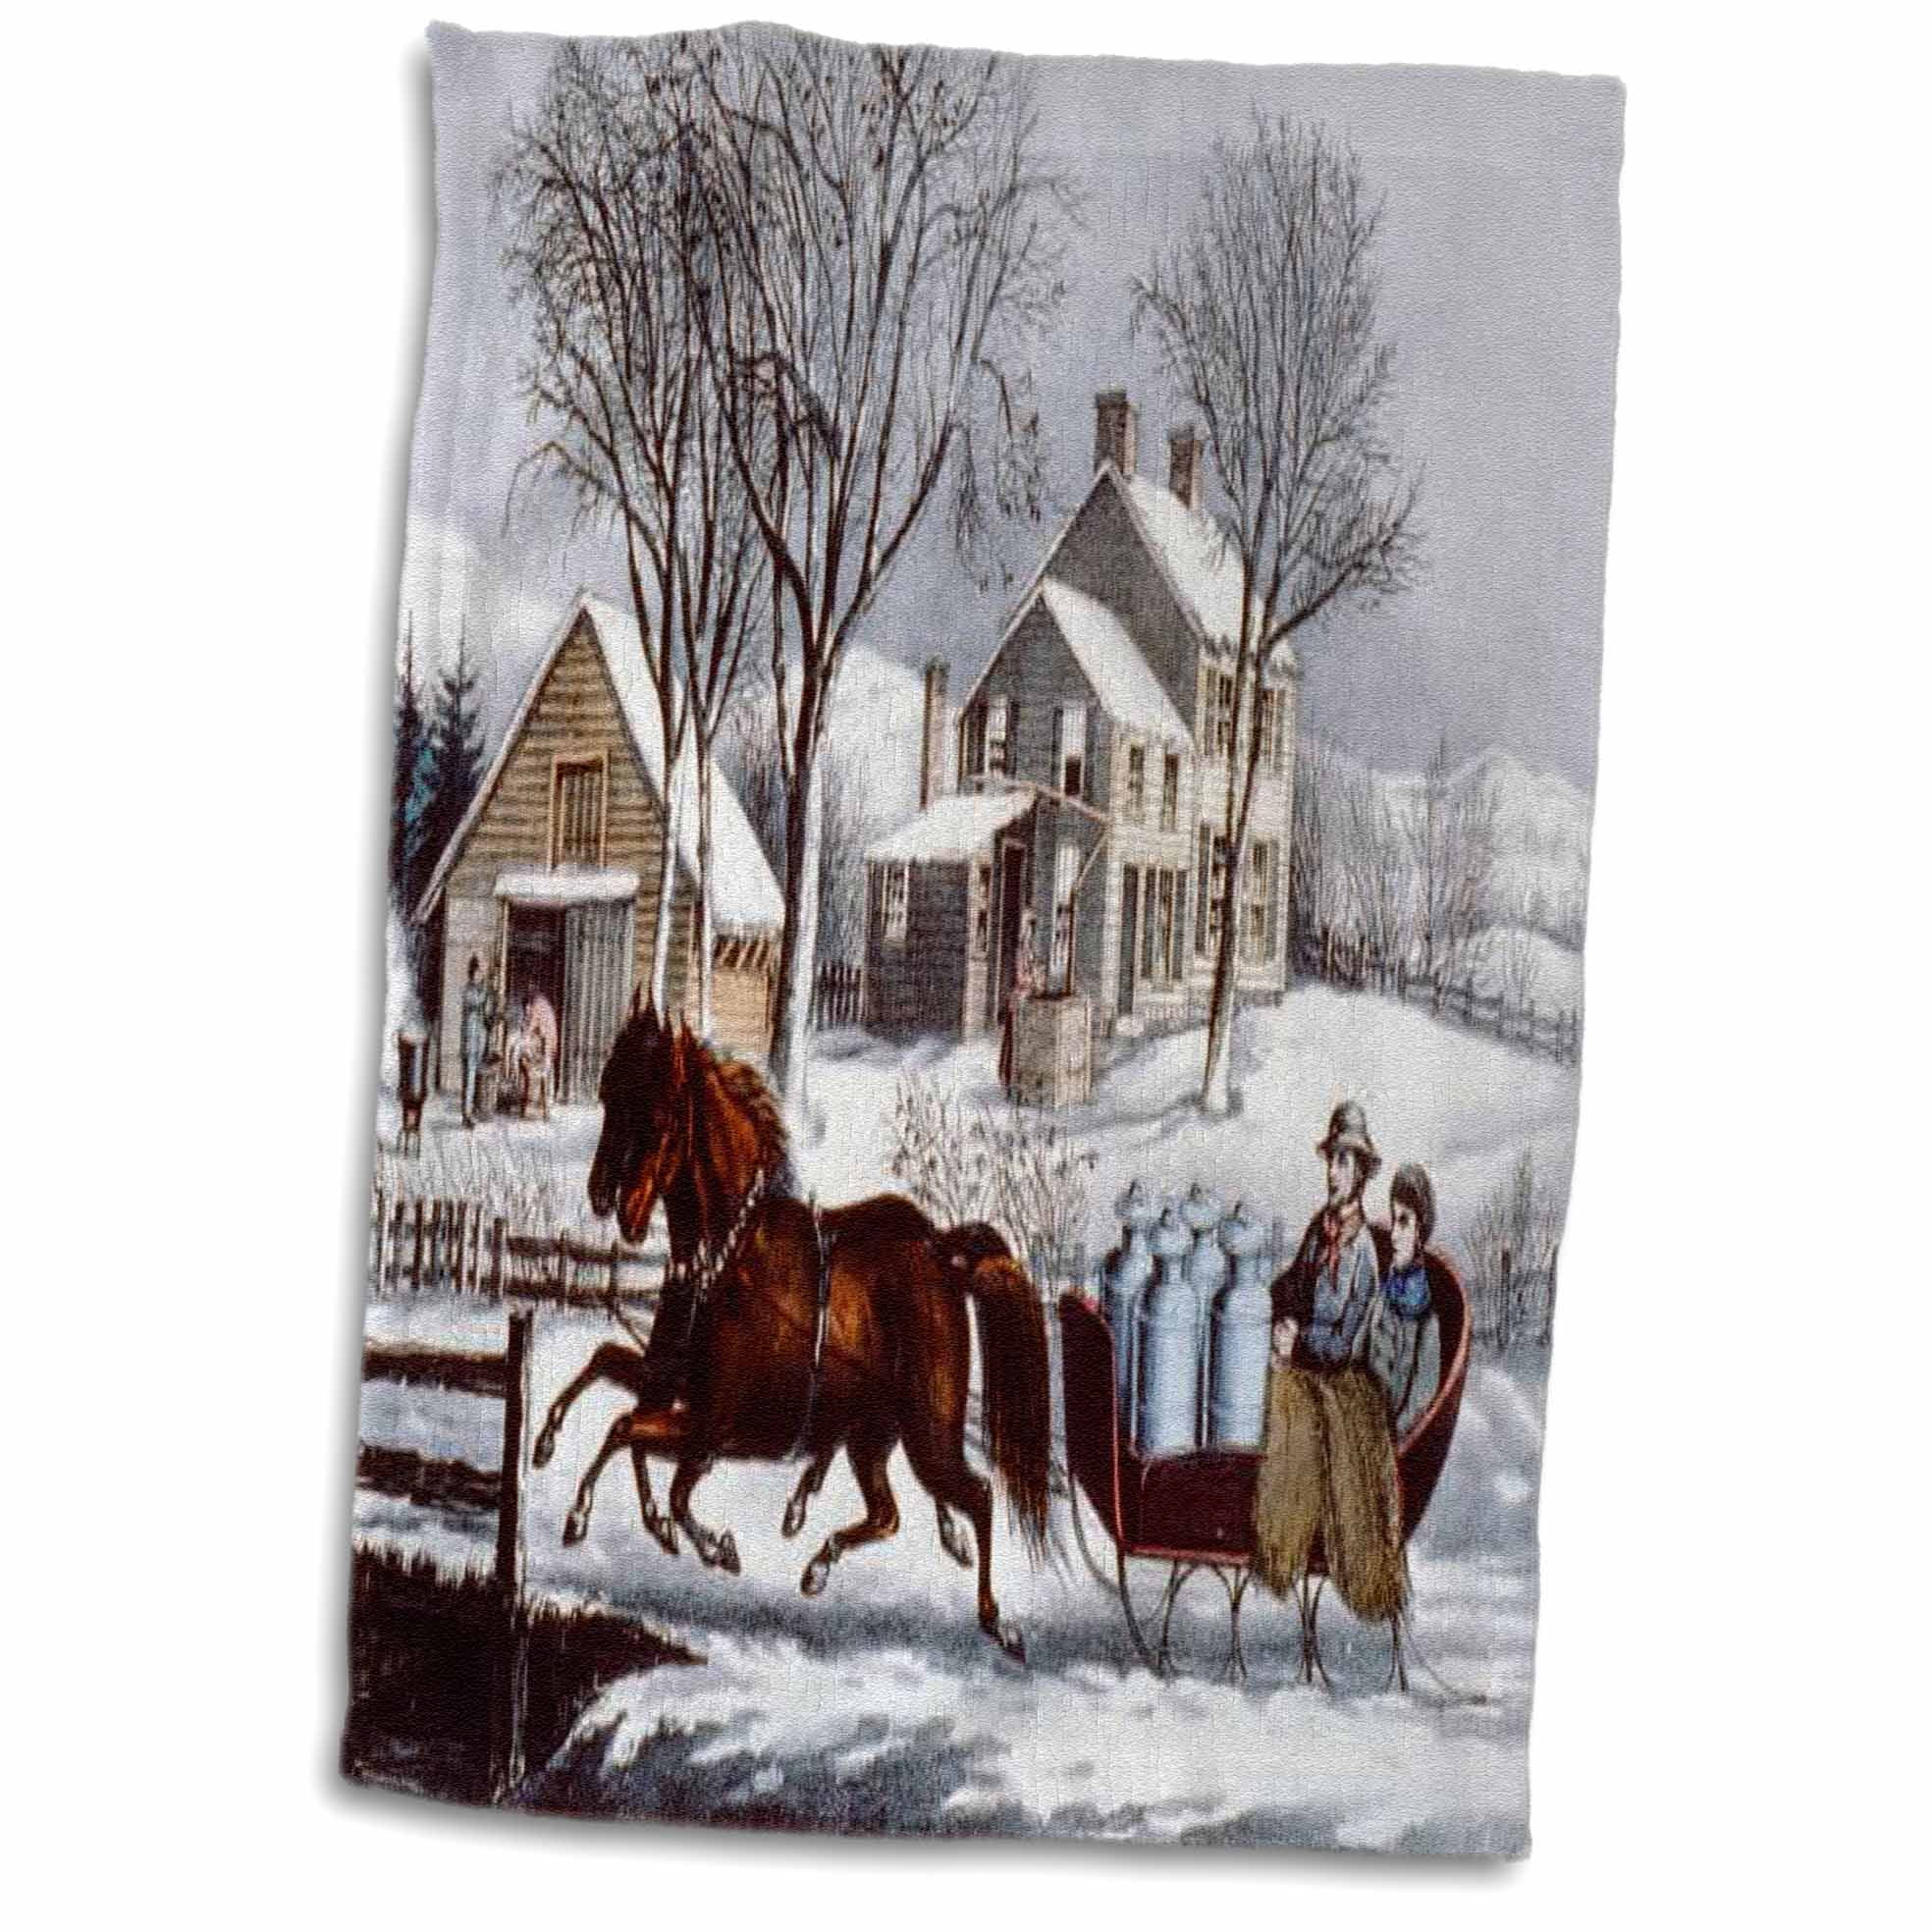 Old Fashion Horses Sleigh Currier and Ives type print Christmas 